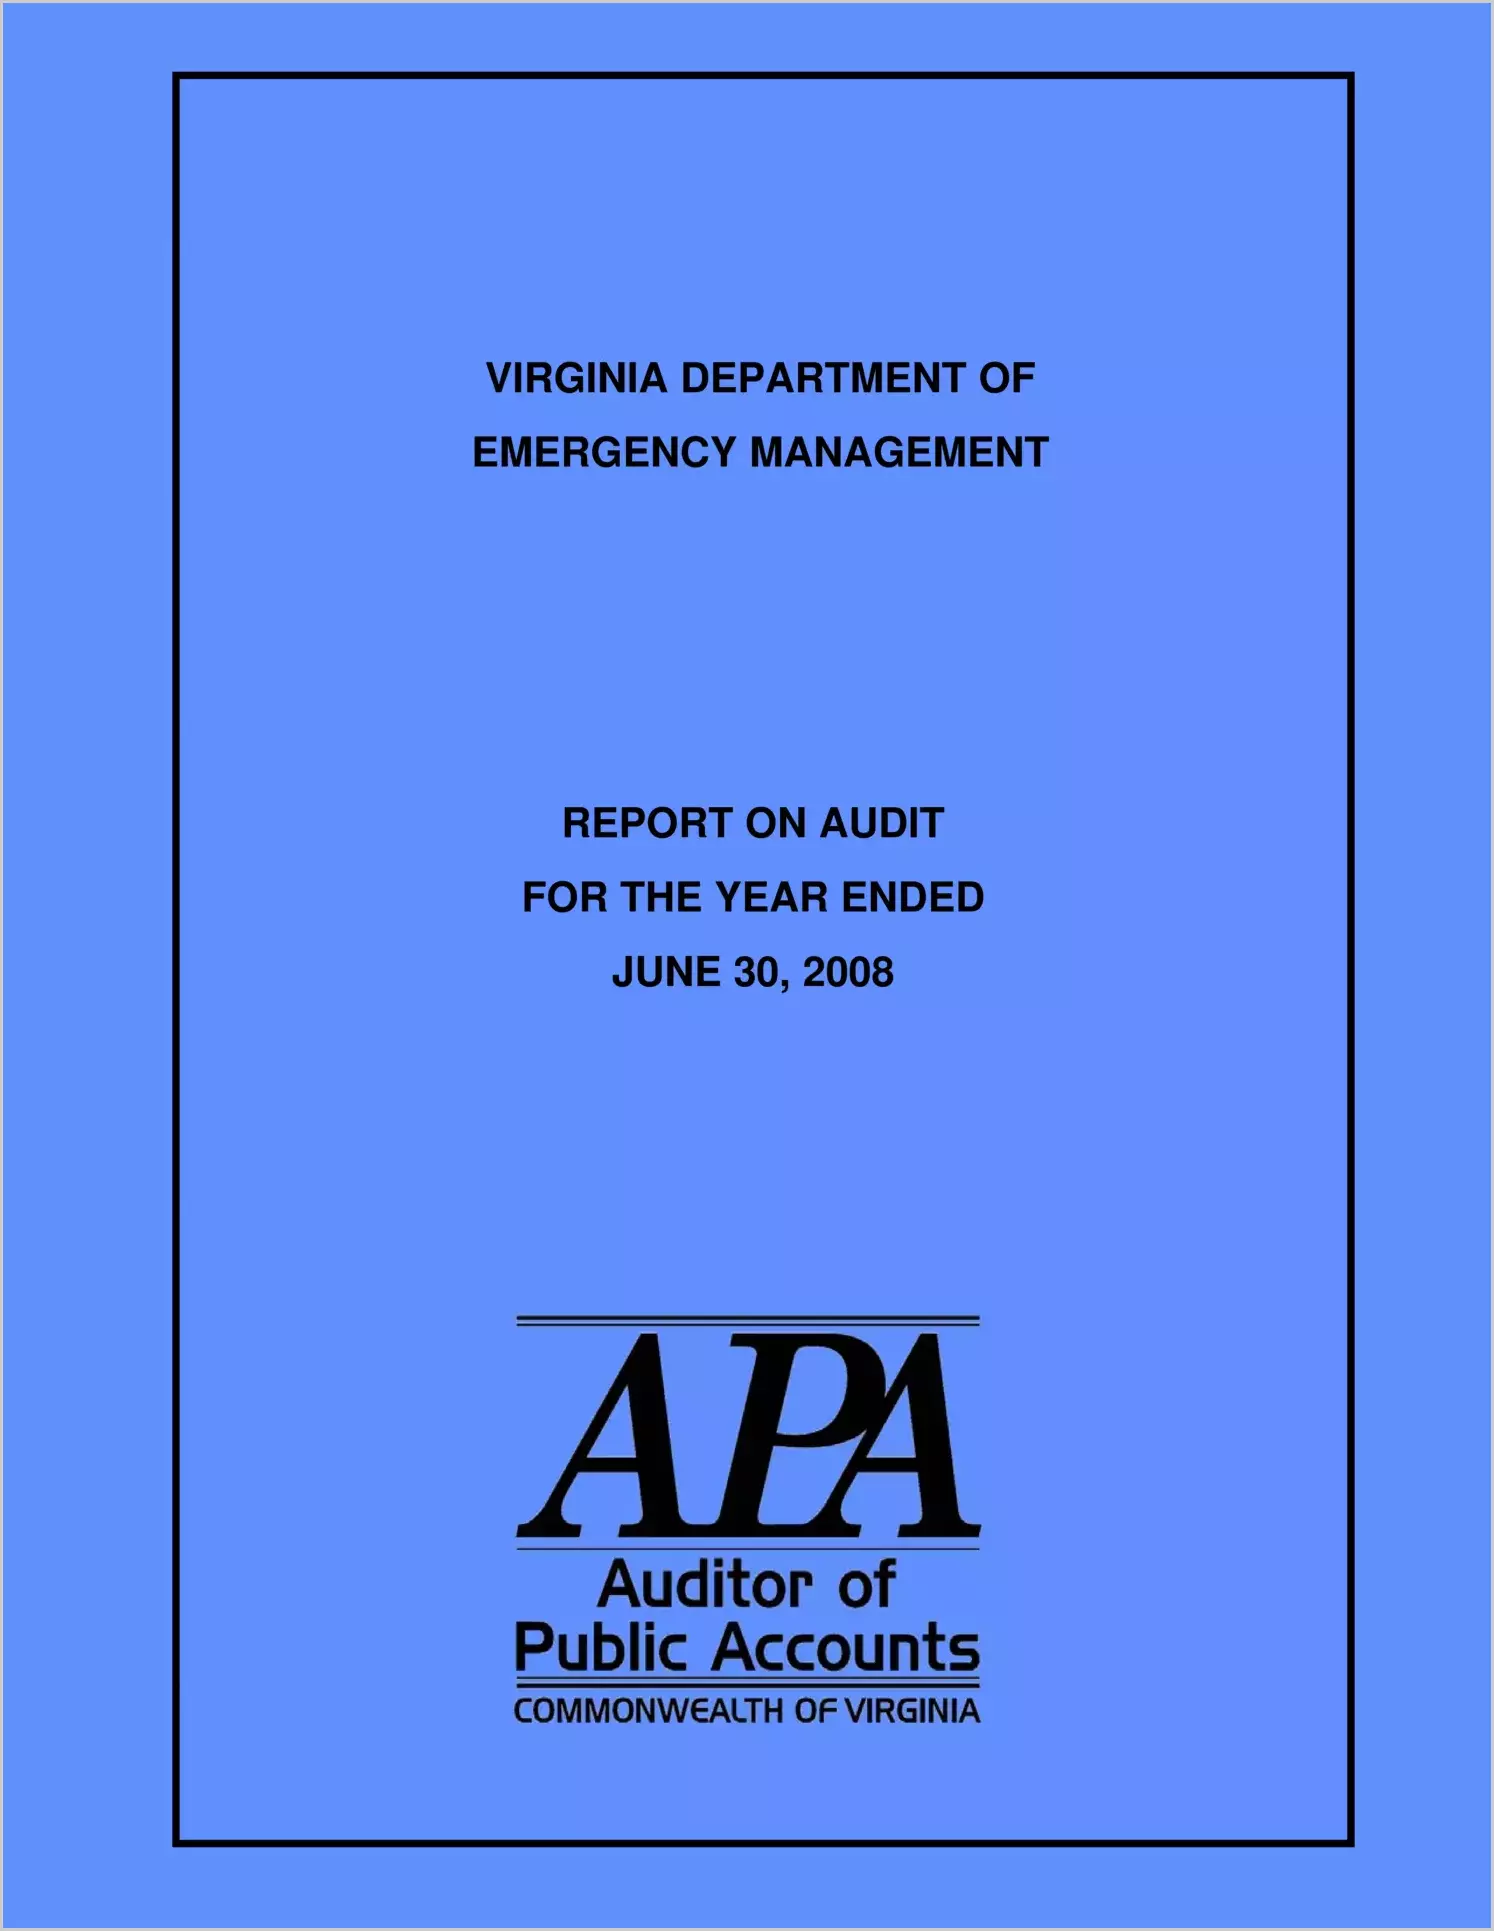 Virginia Department of Emergency Management report on audit for the year ended June 30, 2008